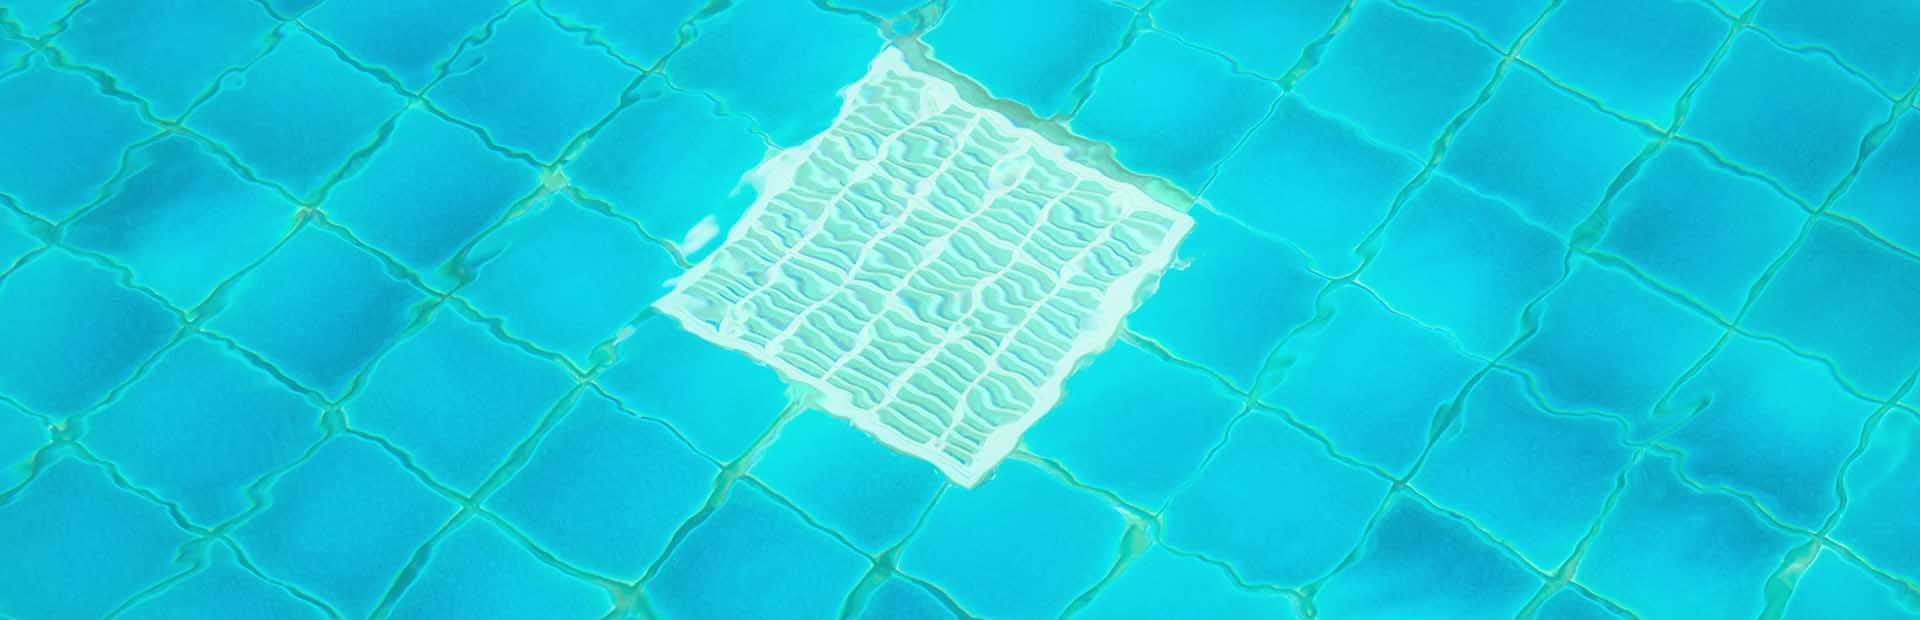 Outdoor pool with a focus on the grate in its floor